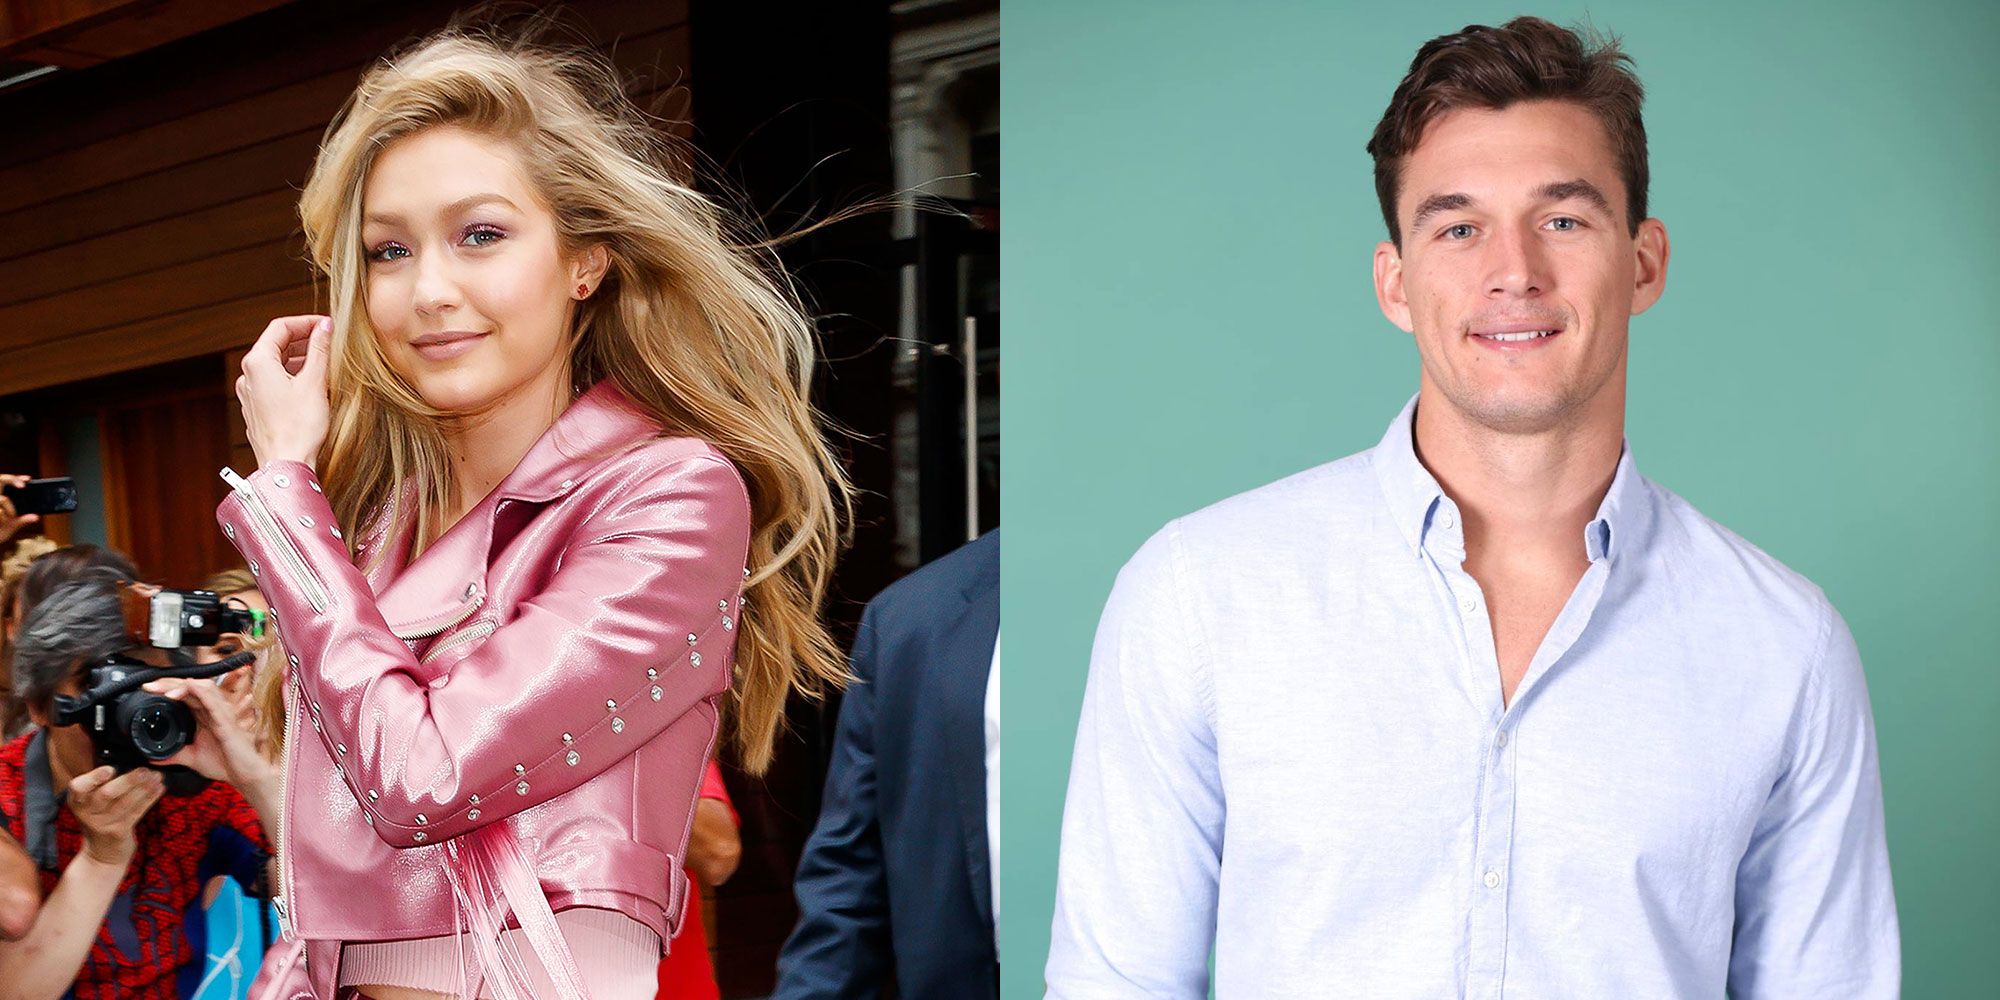 Tyler Cameron and Gigi Hadid apparently knew of each other before he appeared on The Bachelorette